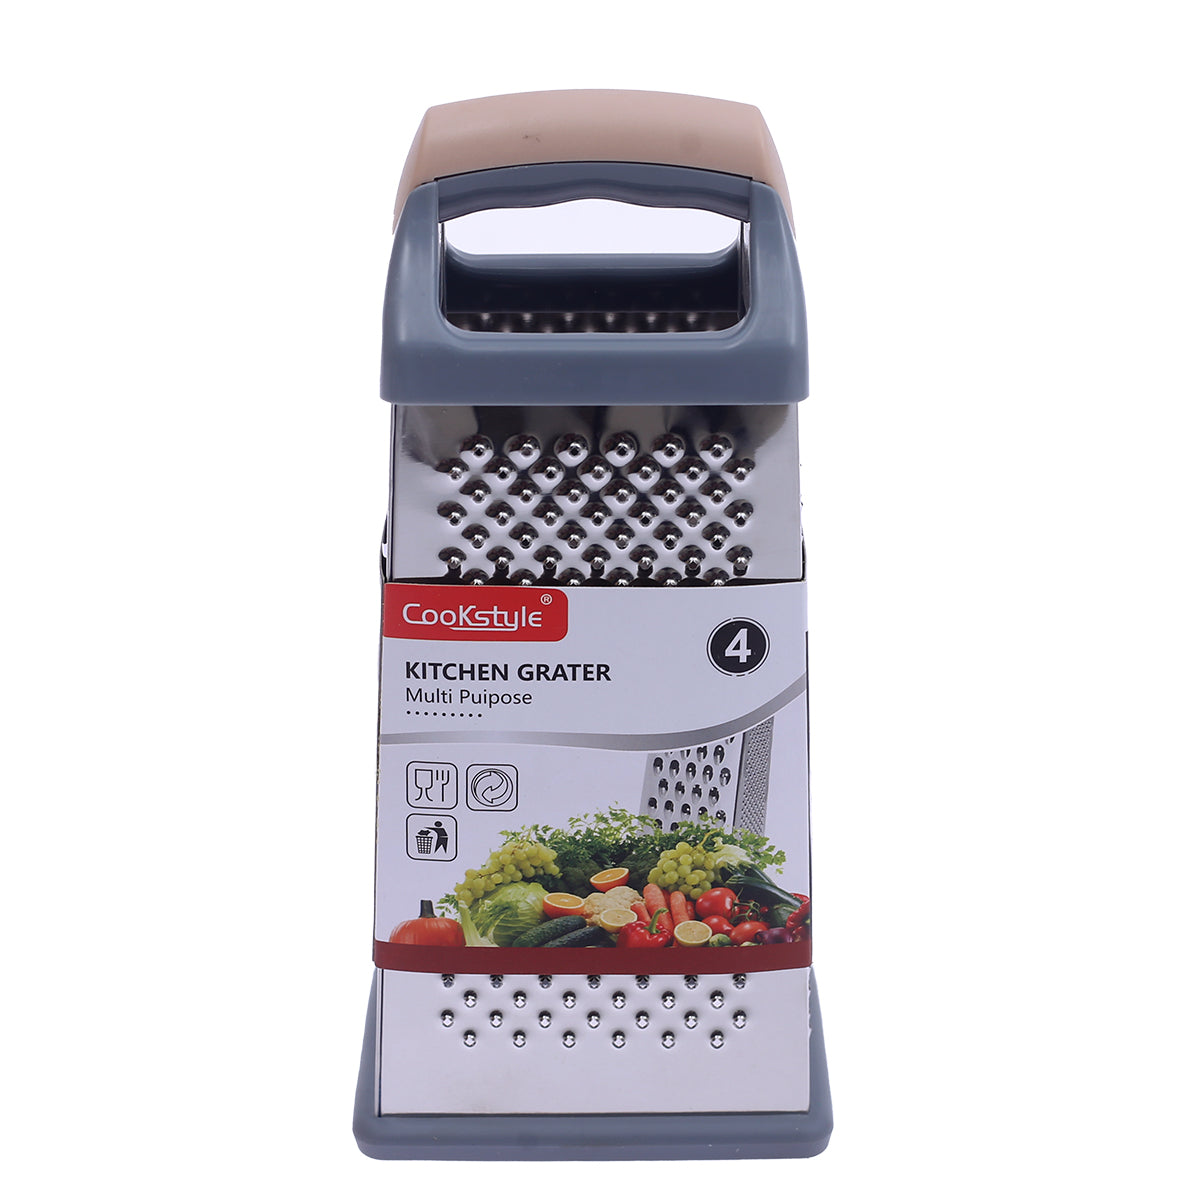 GRATER SIZE 9 INCH GCI 1-2 FP007-2